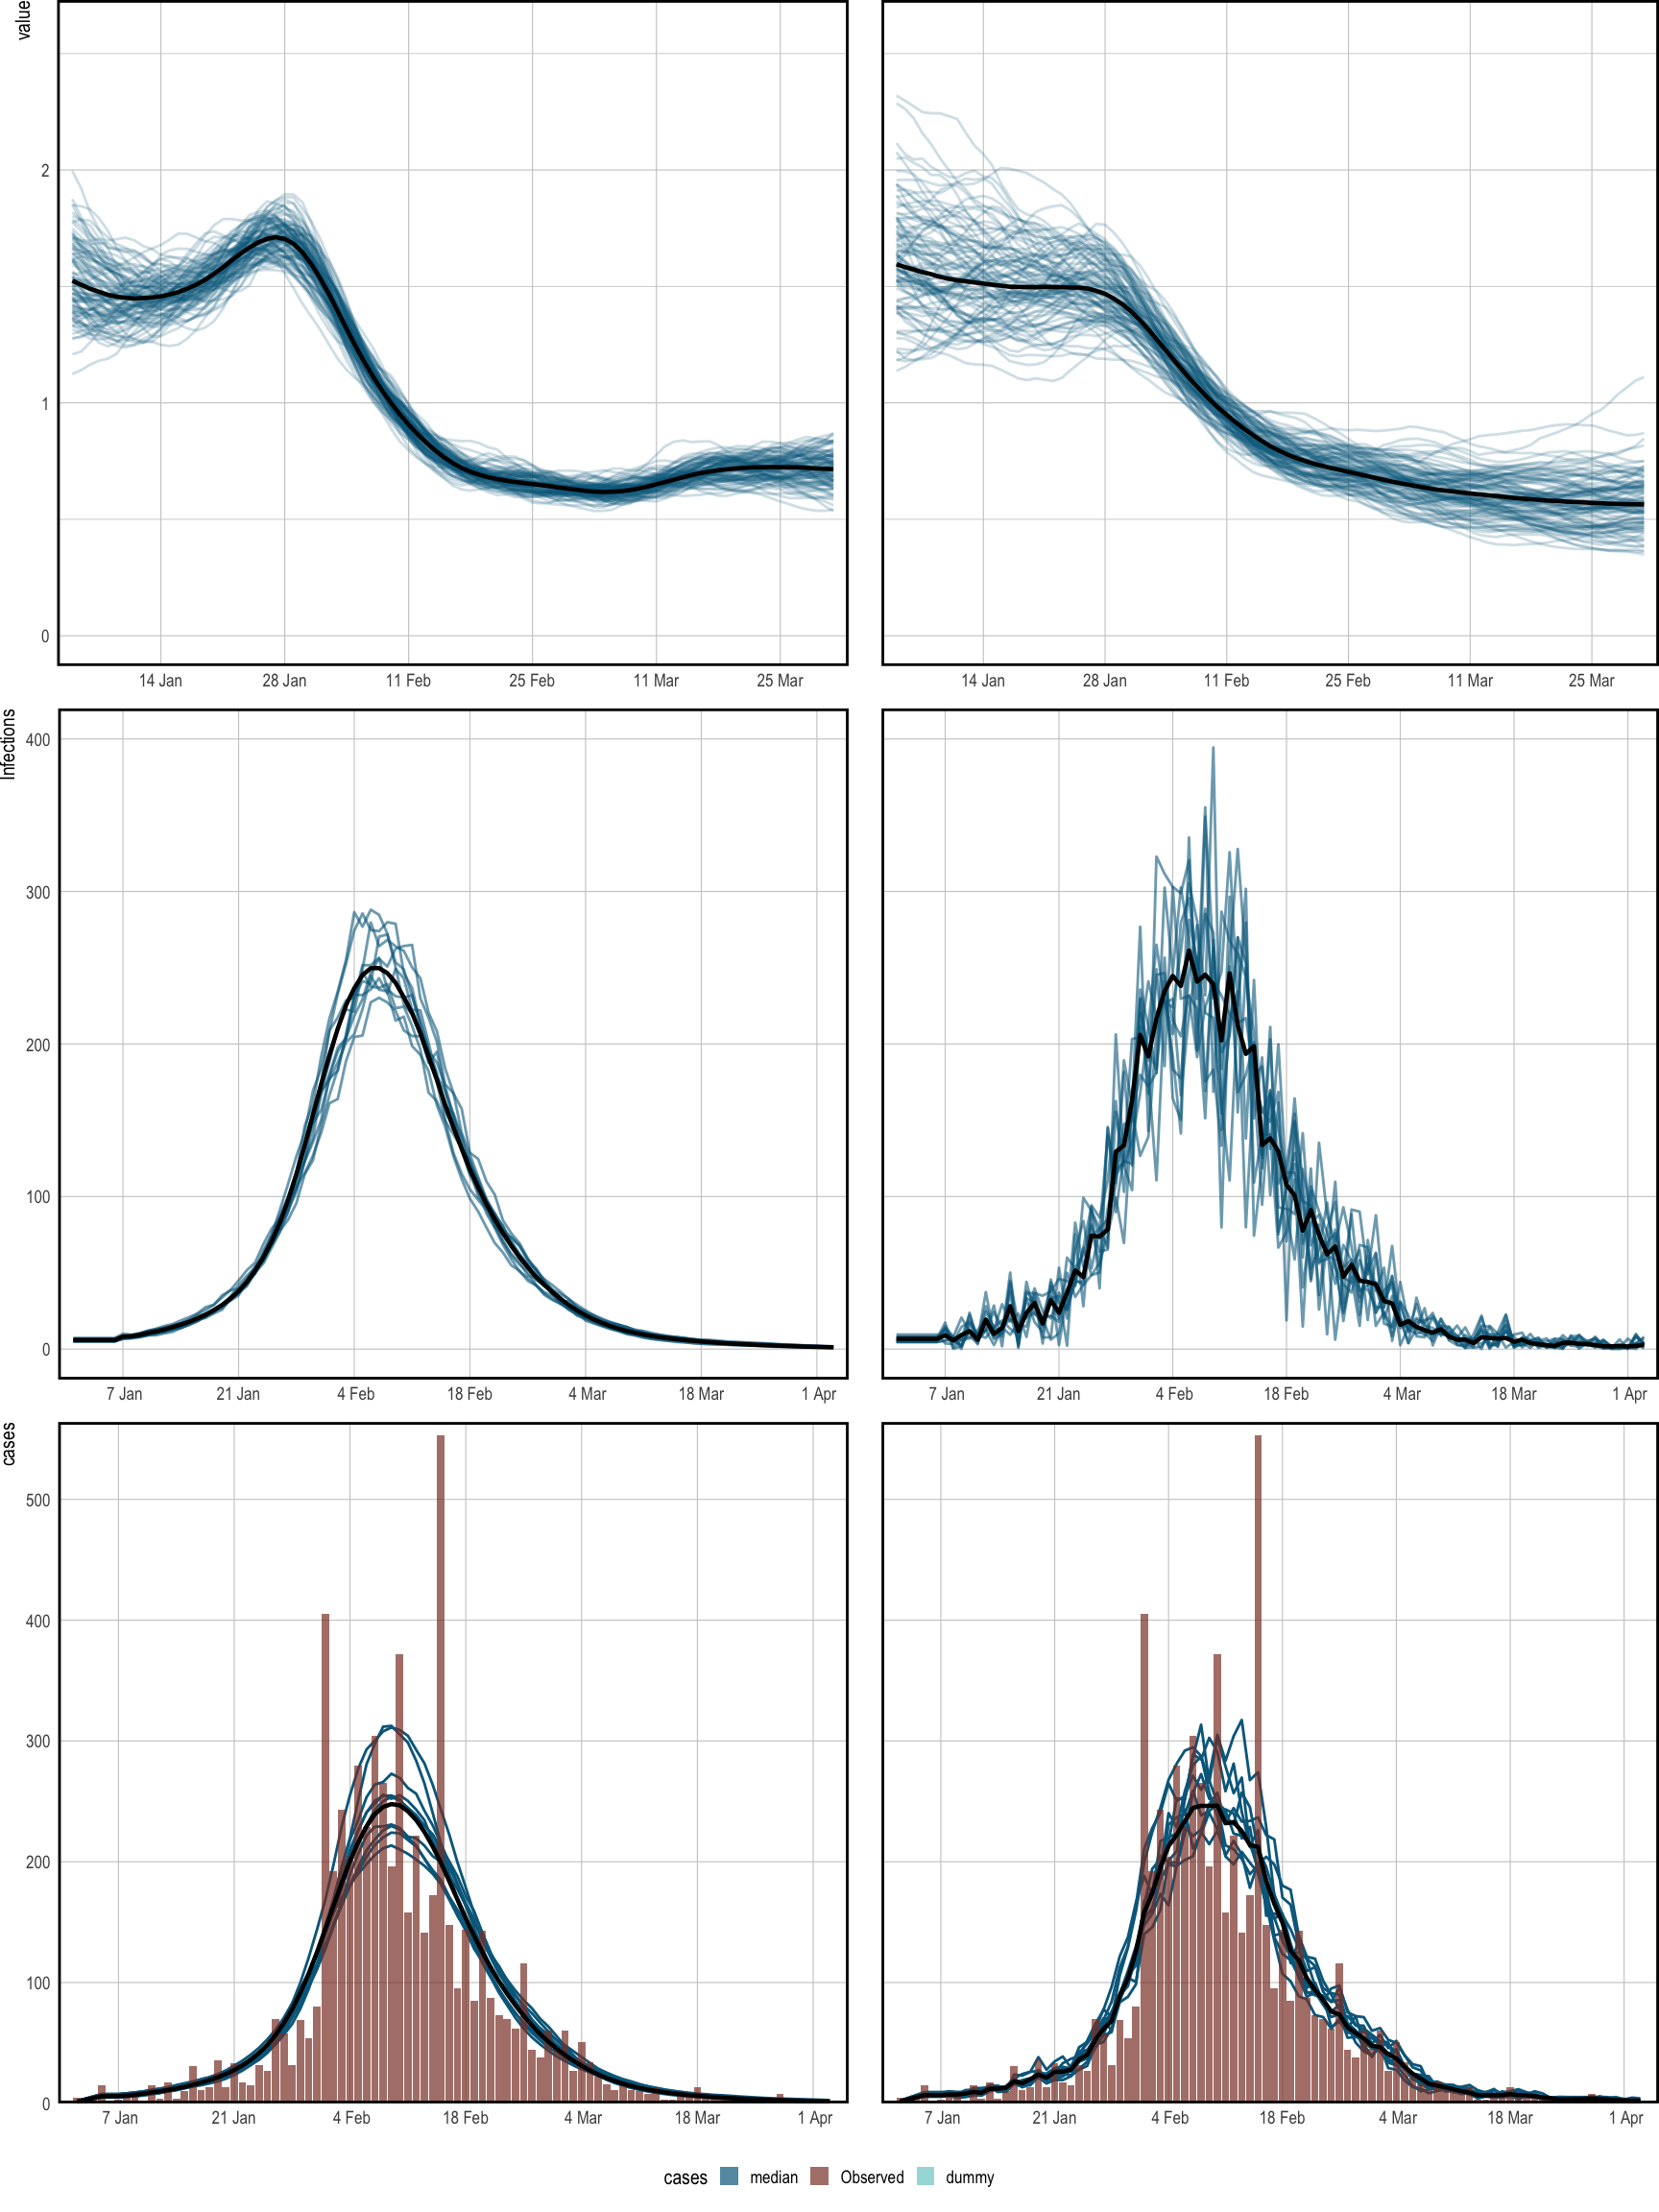 Spaghetti plots showing the median (black) and sample paths (blue) from the posterior distribution. The **left** corresponds to the basic model, and the **right** panel is for the extended version. **Top**: inferred time-varying reproduction numbers, which have been smoothed over 7 days for illustration. **Middle**: Inferred latent infections. **Bottom**: observed cases, and cases simulated from the posterior. These align closely, and so do not flag problems with the model fit.